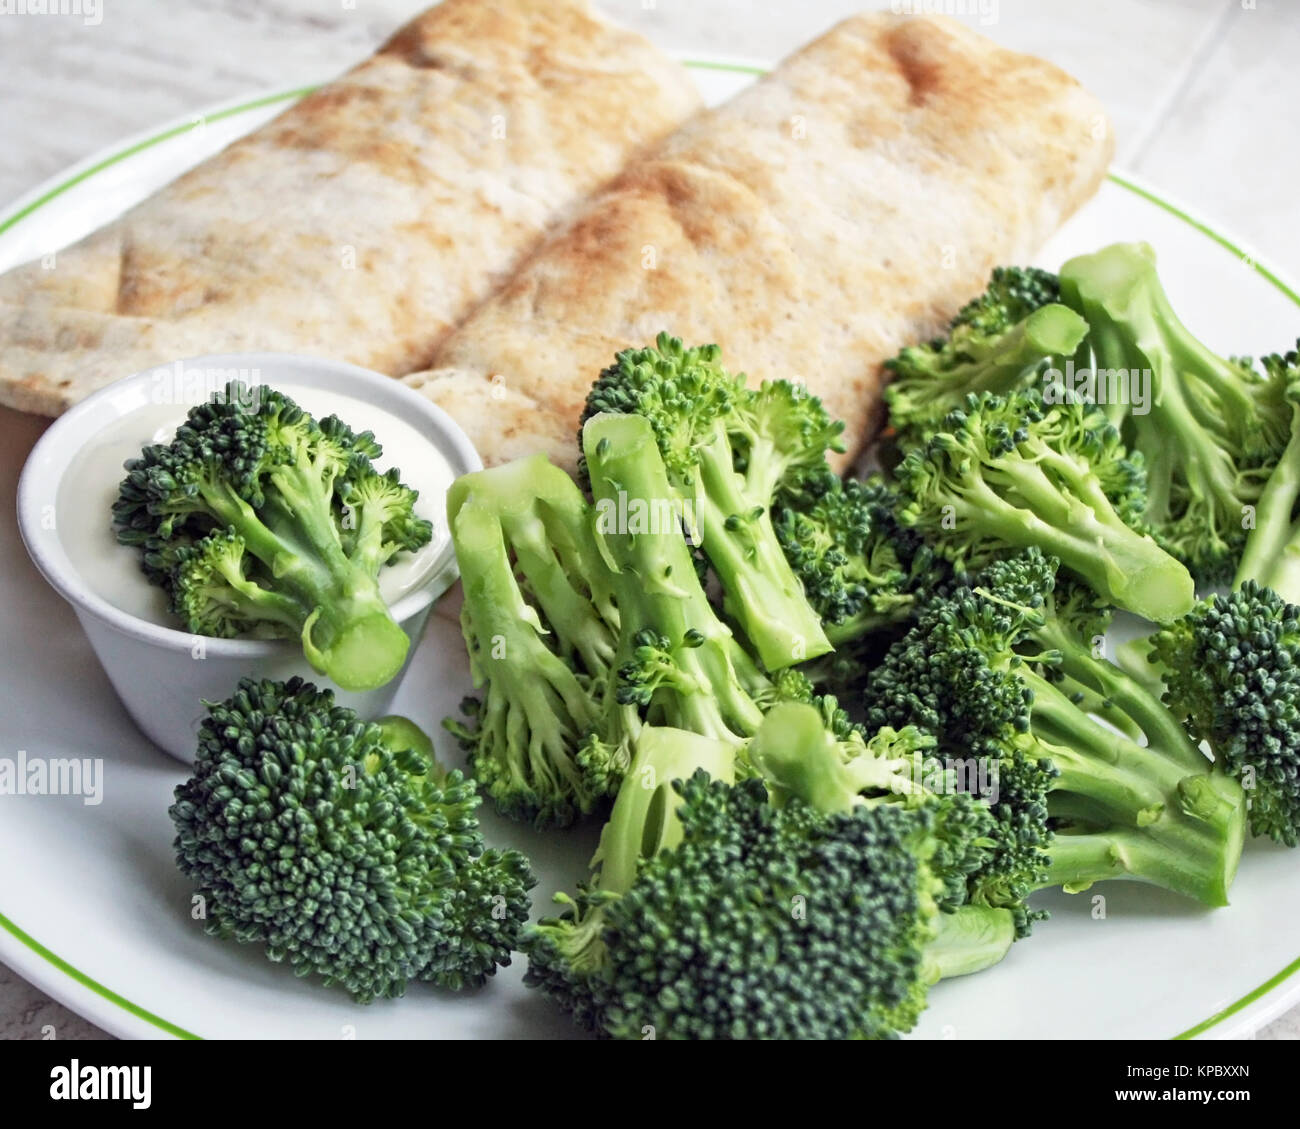 Two filled Tortilla wraps with a side of fresh broccoli and a container of creamy dressing for dipping Stock Photo